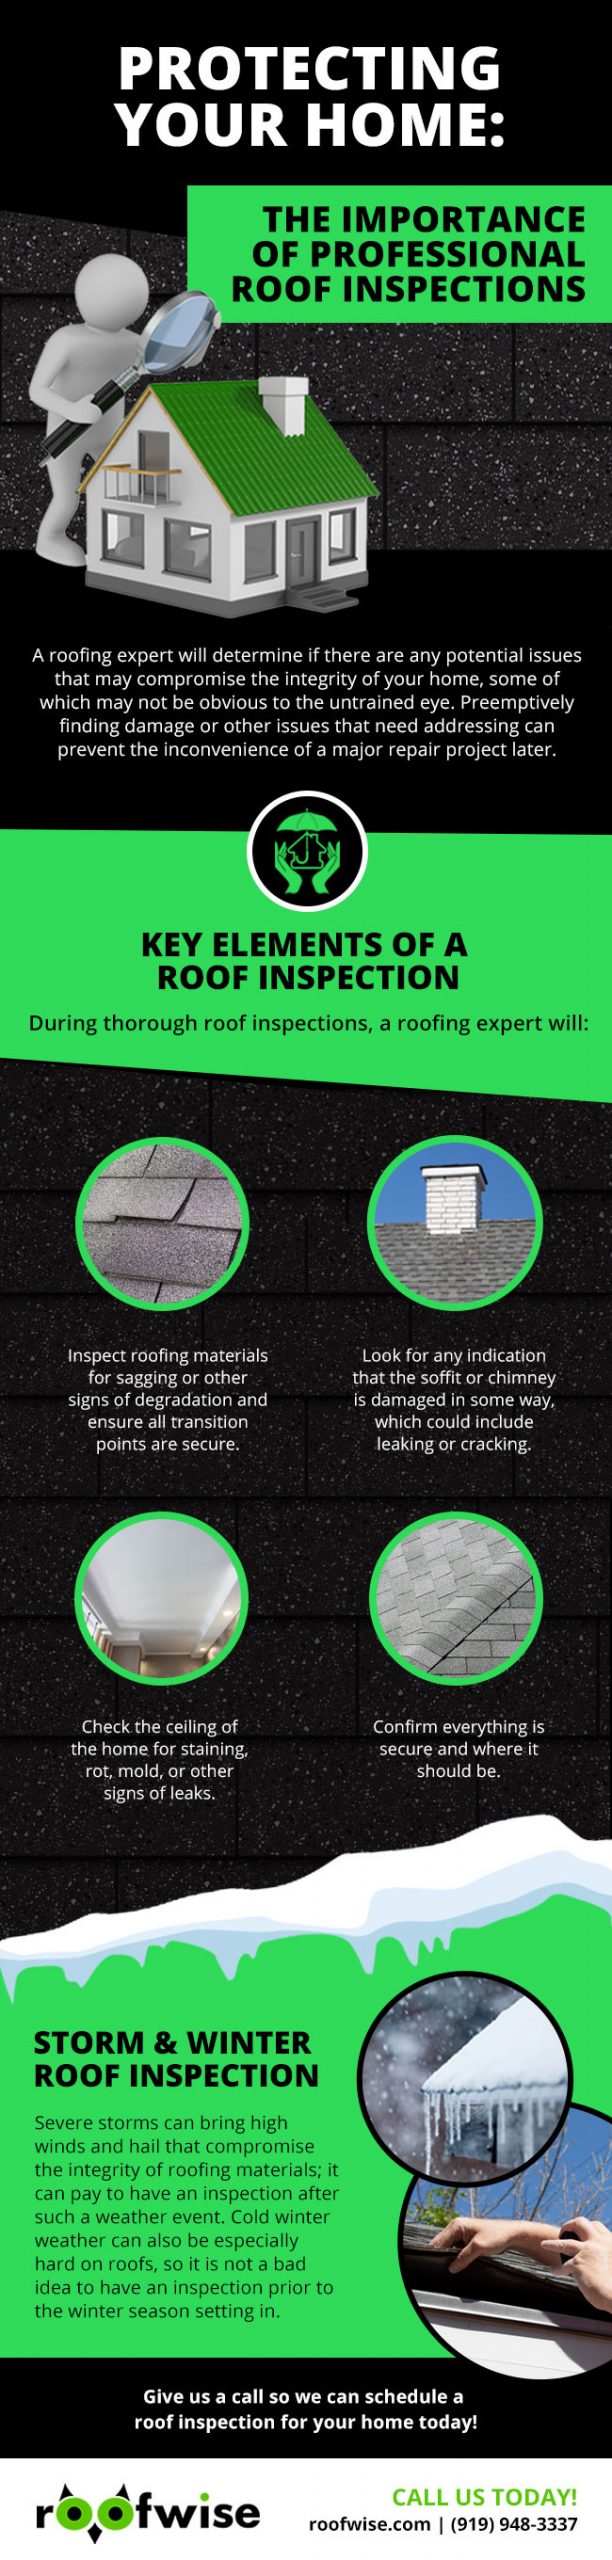 Roof Inspections Are a Good Preemptive Measure 